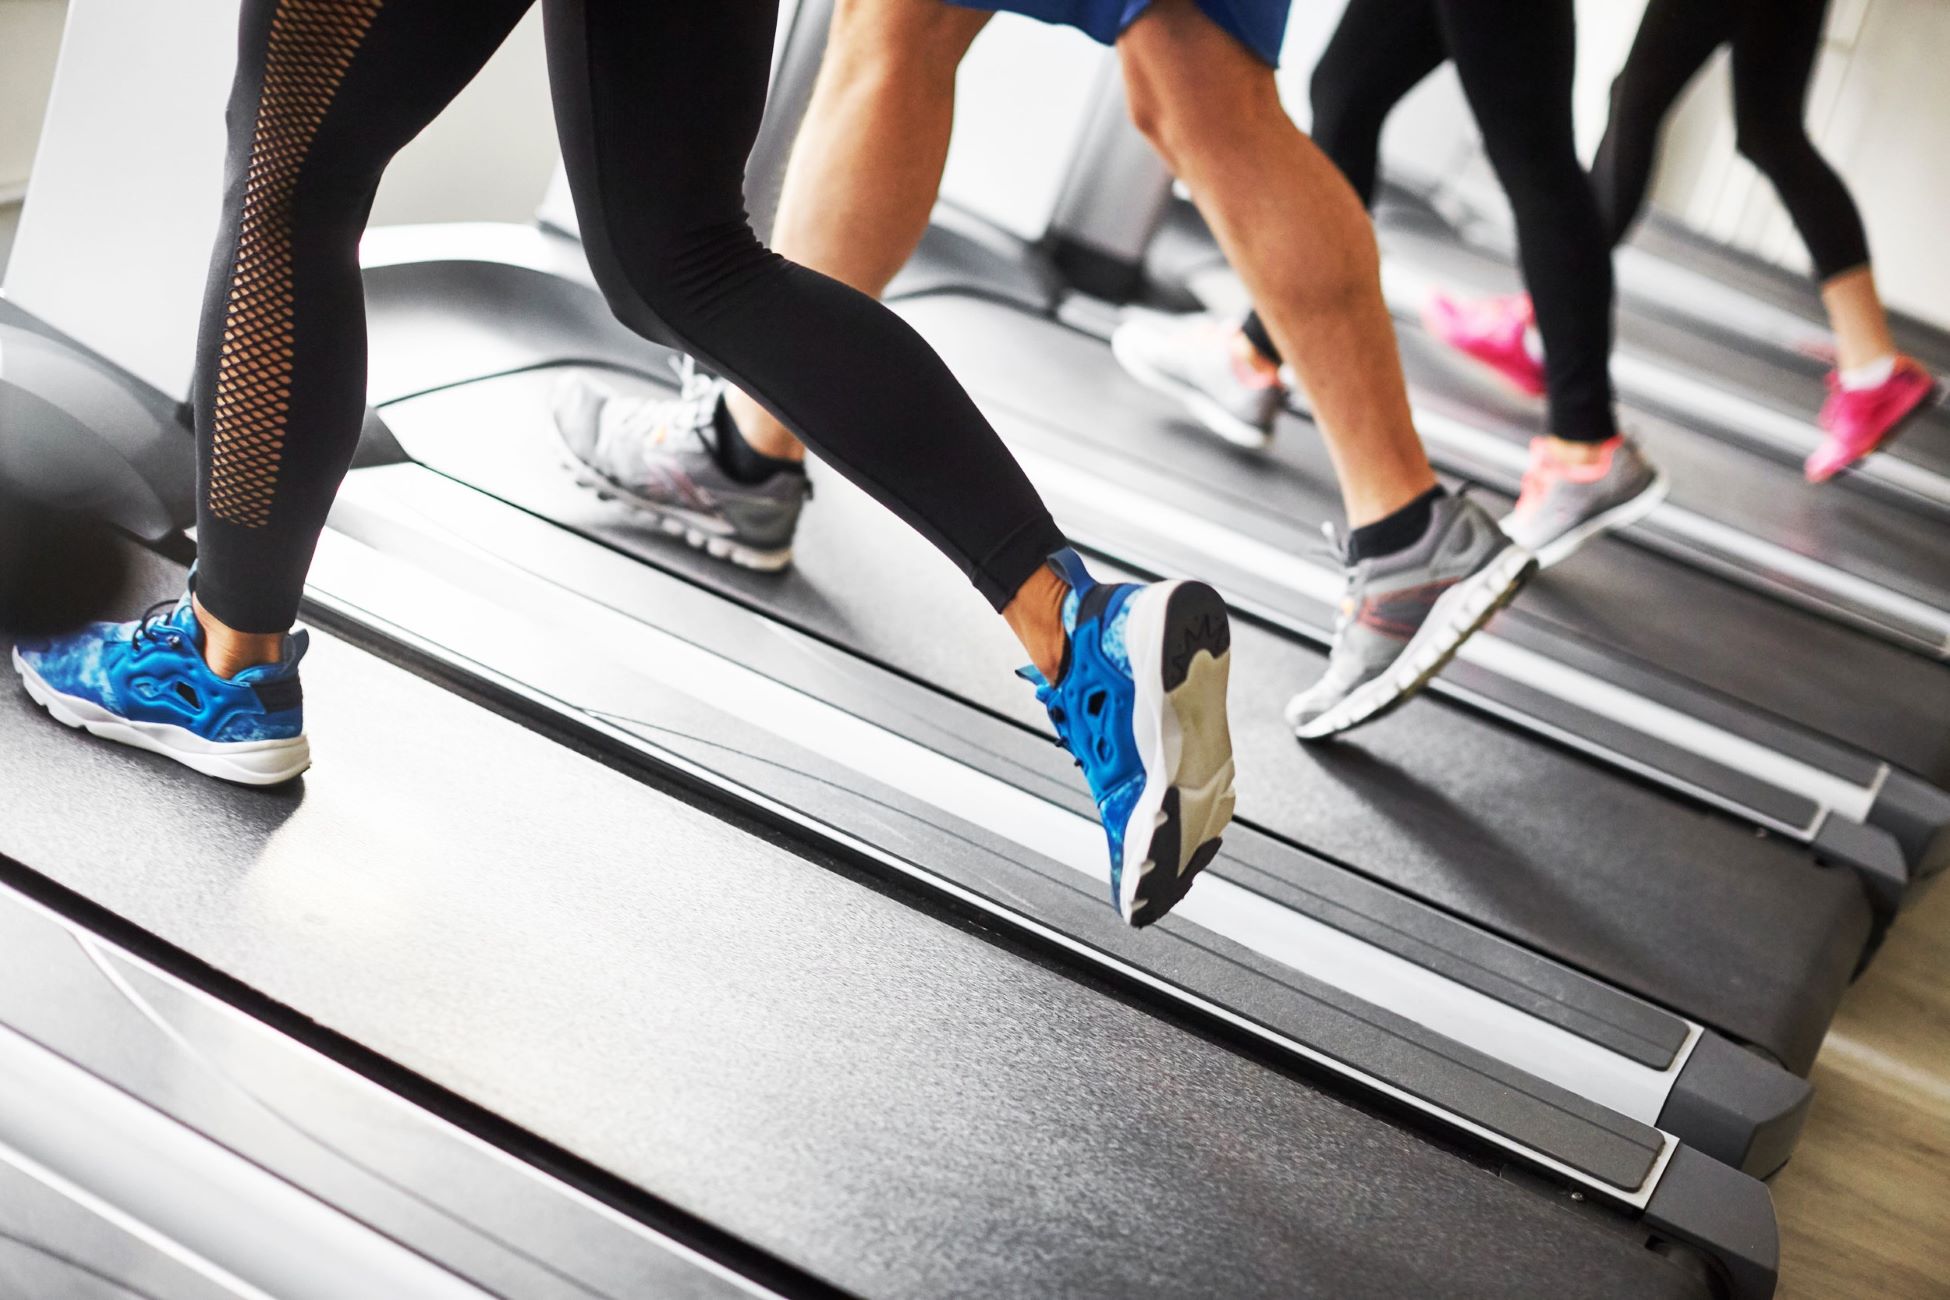 Maintaining Sanity While Running On The Treadmill